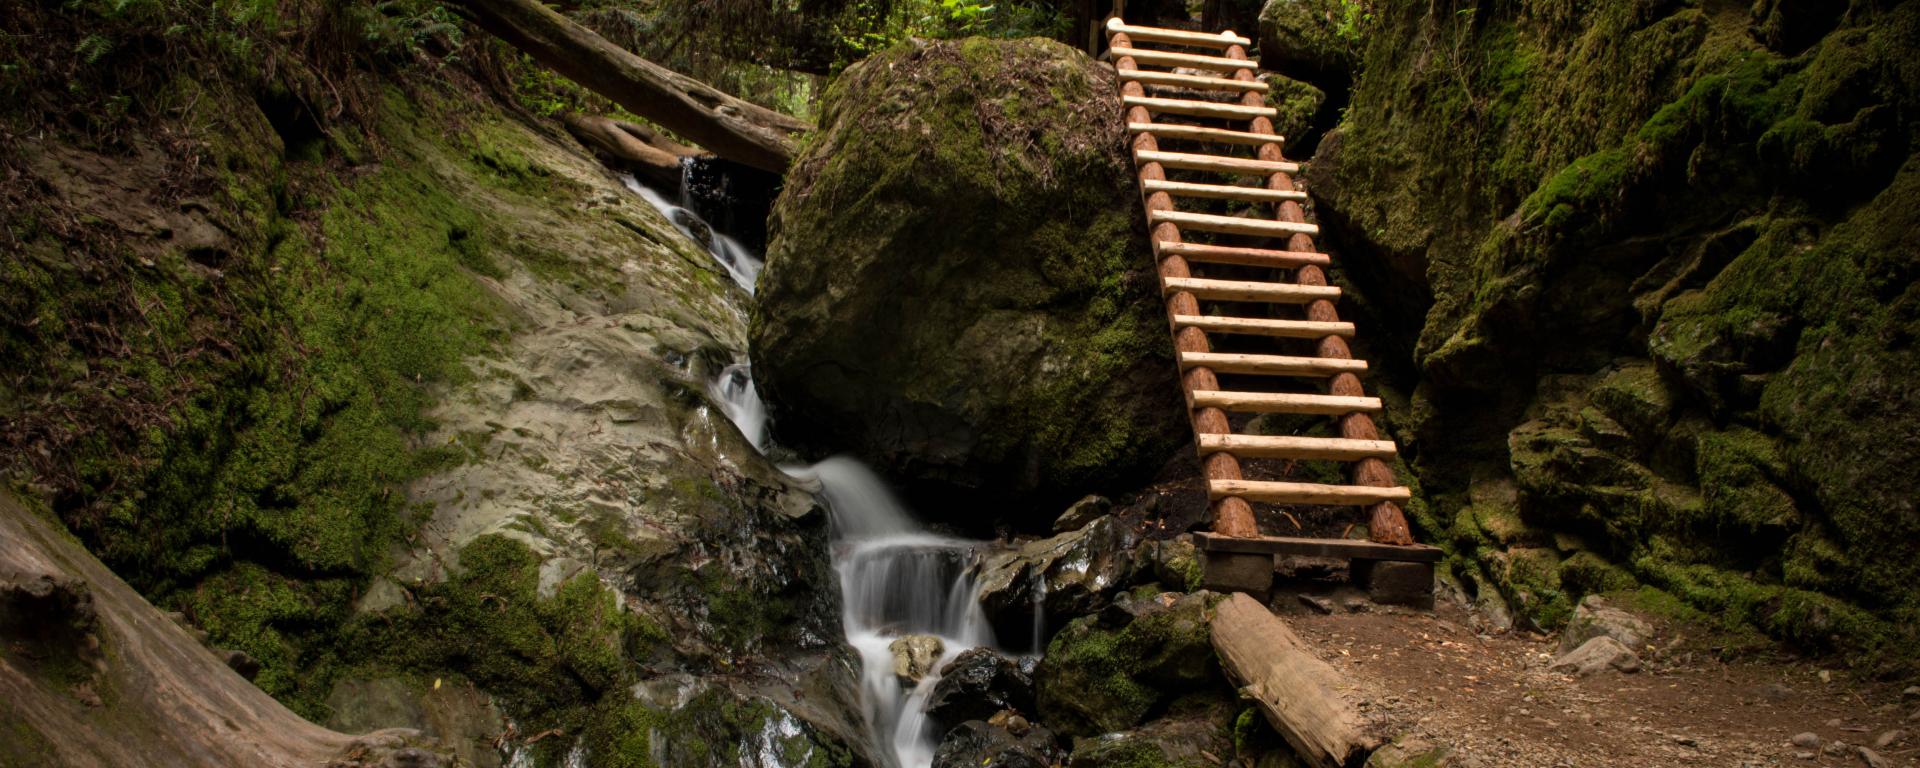 Ladder and trail beside a flowing stream.